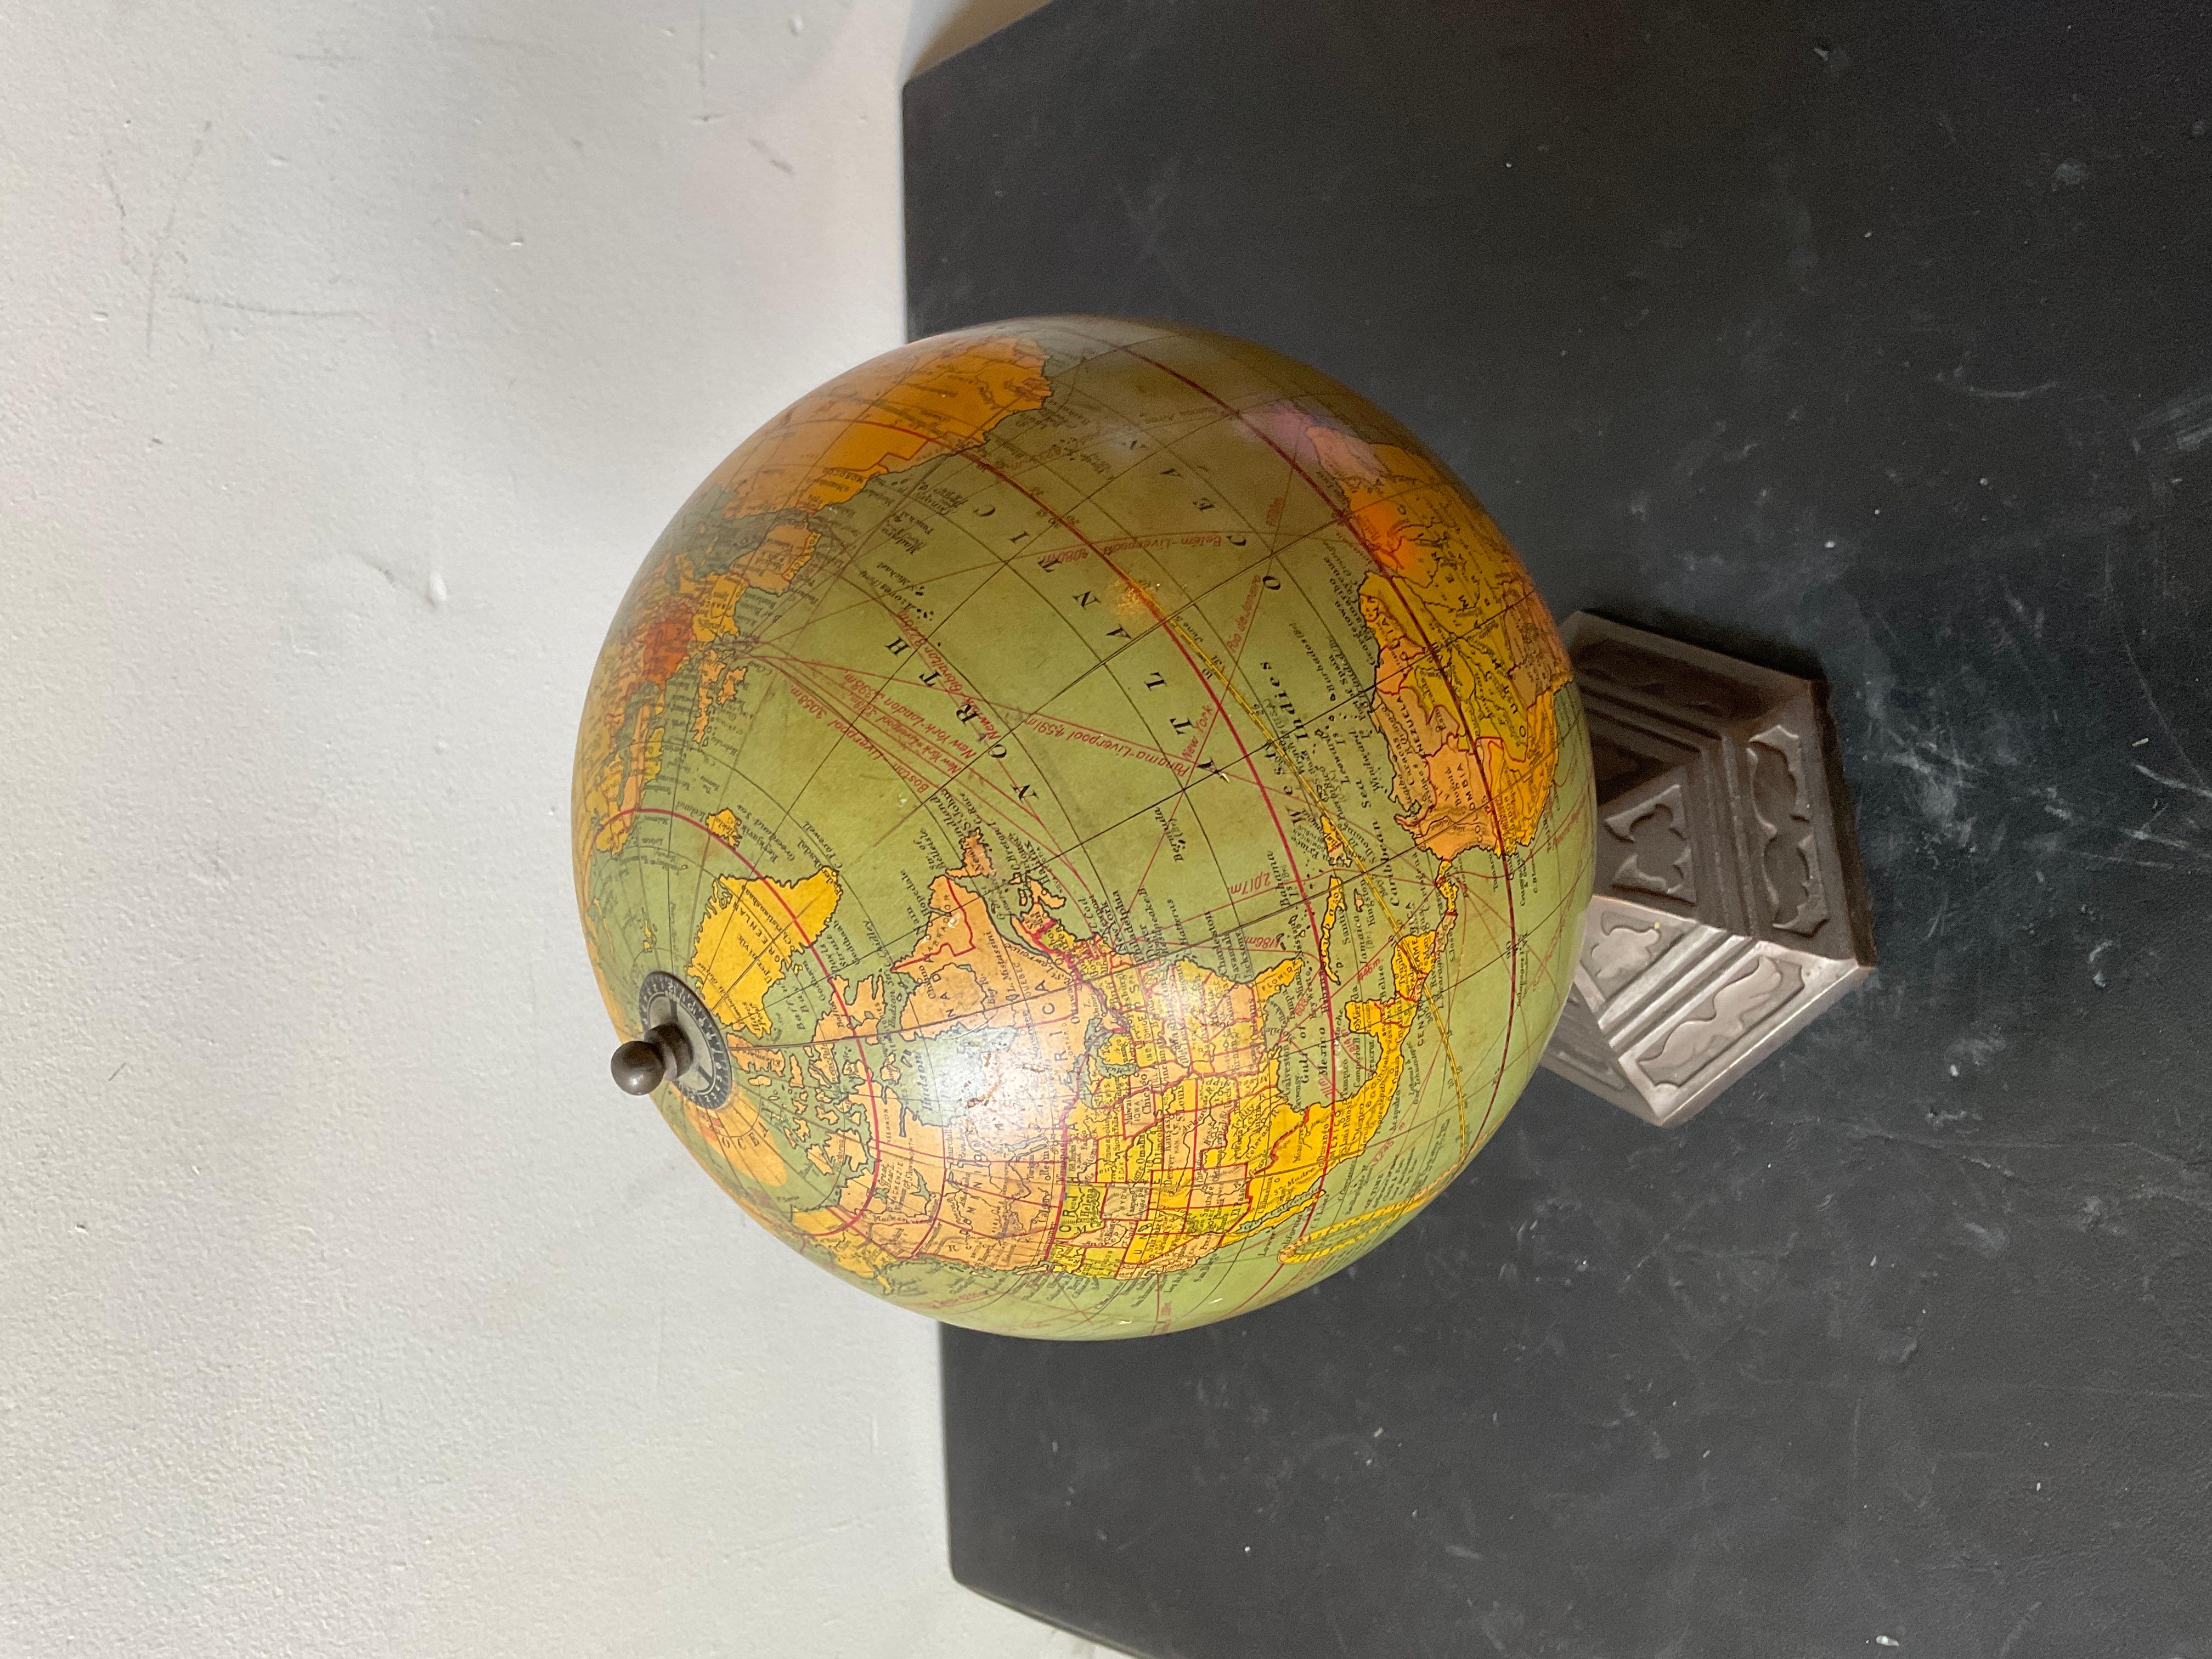 1920s Weber Costello 8” globe, printed in England. Iron base. Some imperfections on globe as shown in pictures.